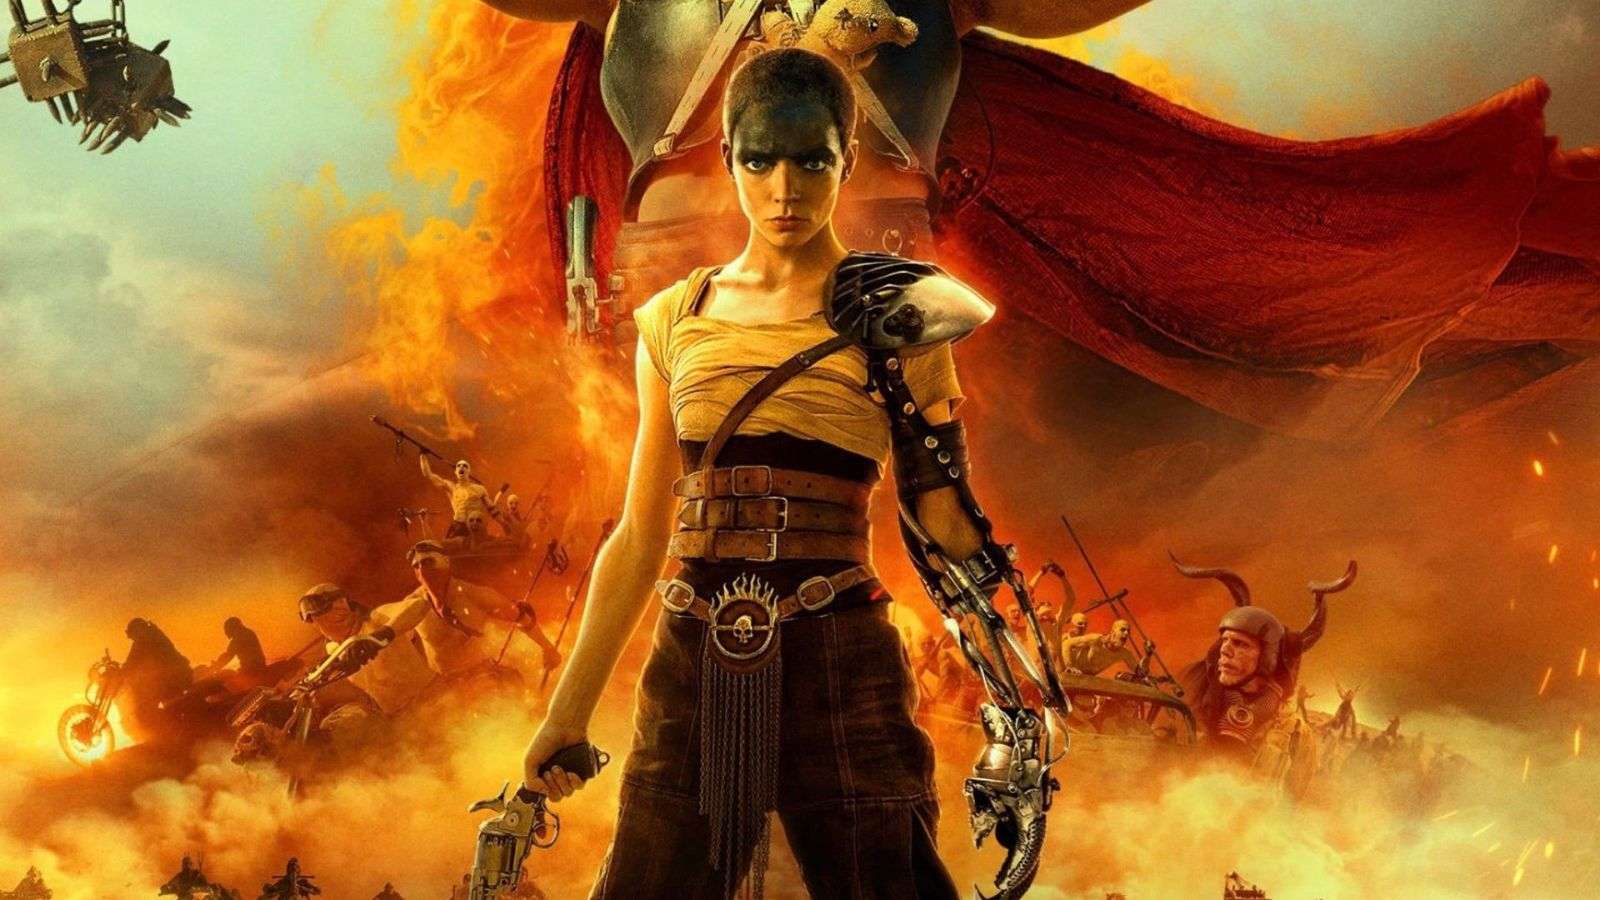 An official poster for Furiosa